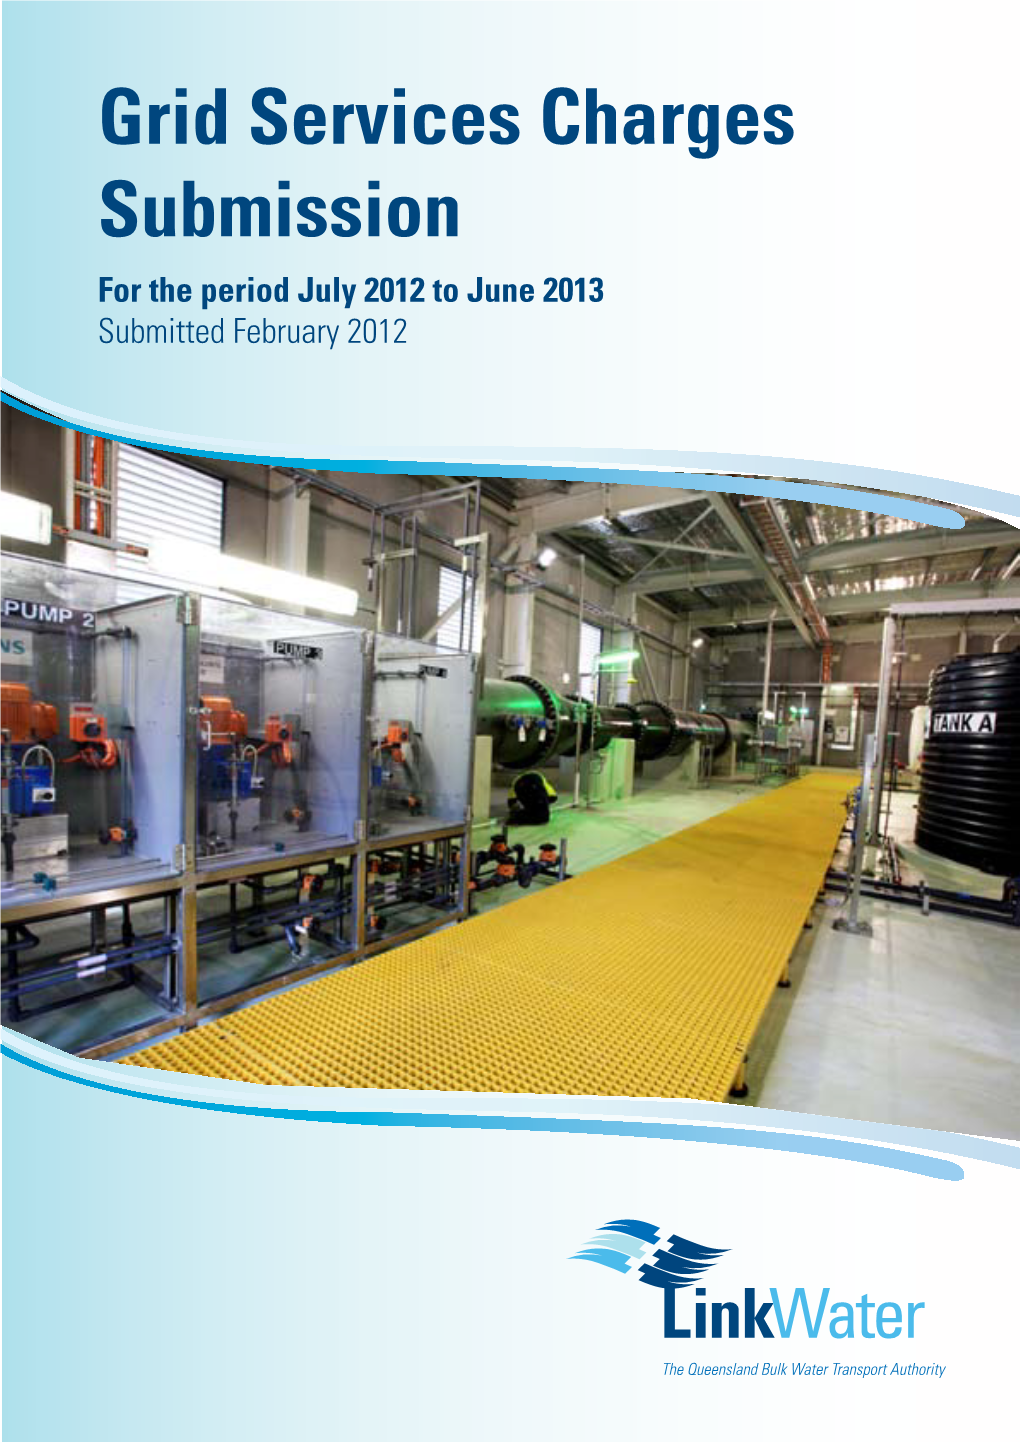 Grid Services Charges Submission for the Period July 2012 to June 2013 Submitted February 2012